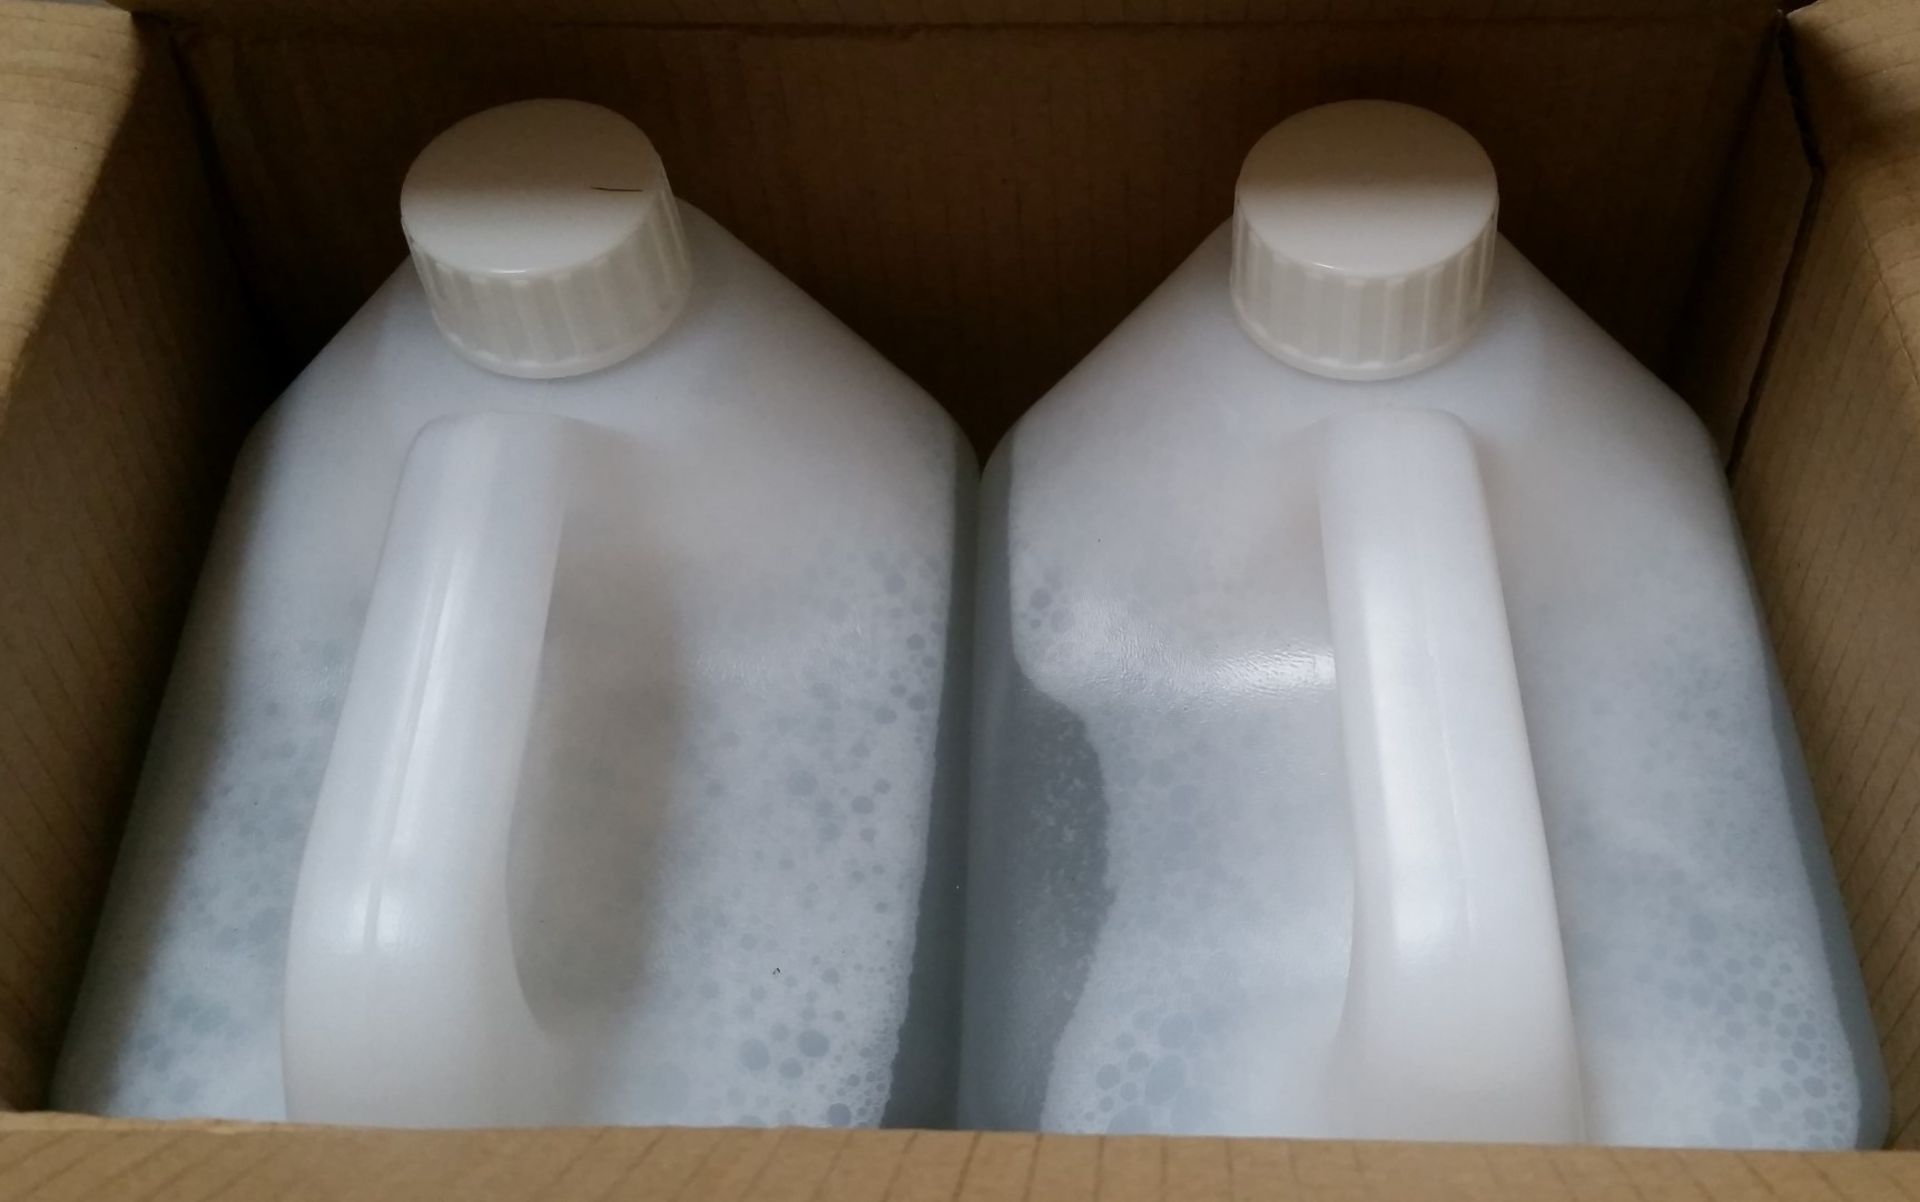 2 x Pro Value 5 Litre Catering Cleaner - Best Before September 2016 - New Boxed Stock - CL083 - - Image 3 of 3